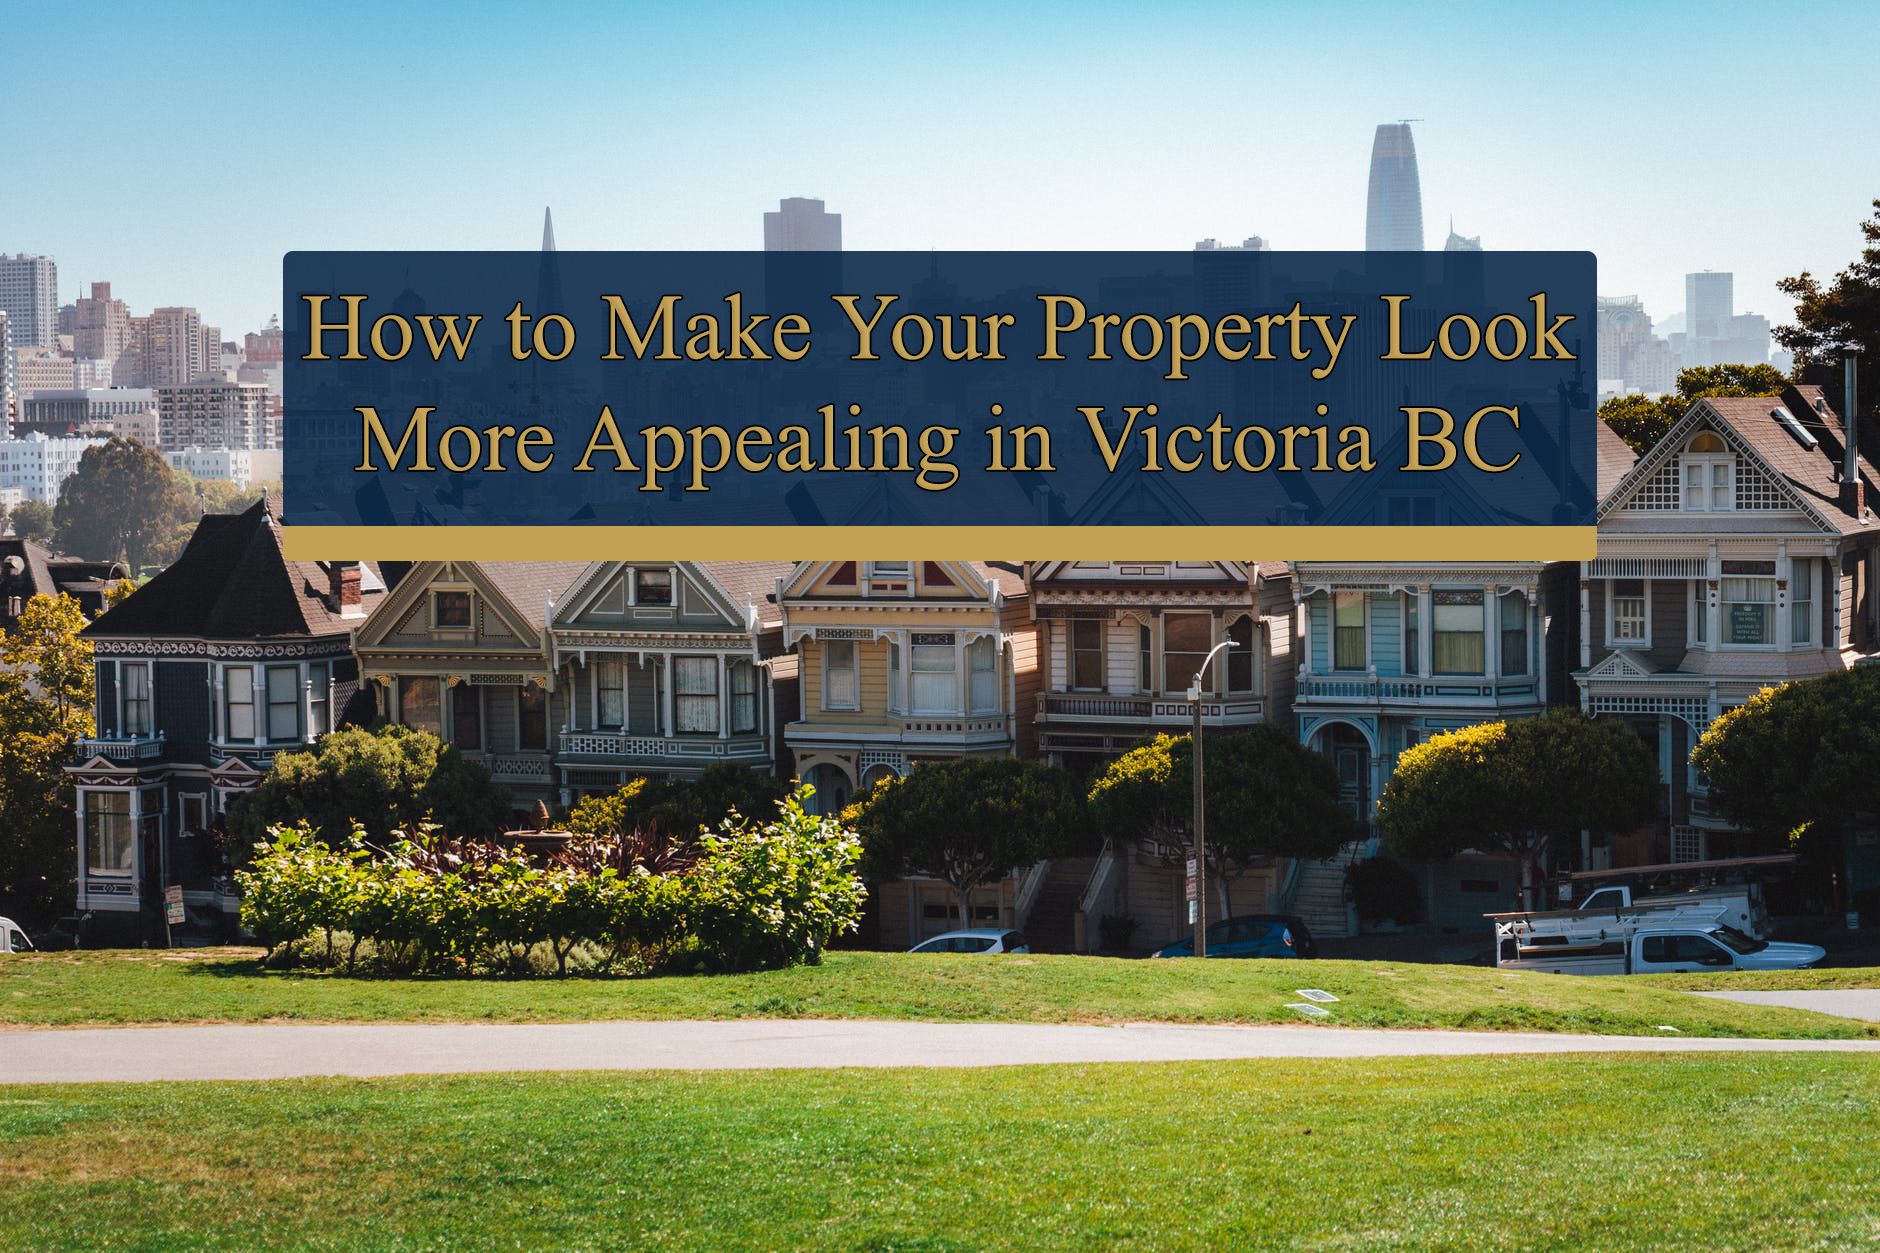 How to Make Your Property Look More Appealing in Victoria BC